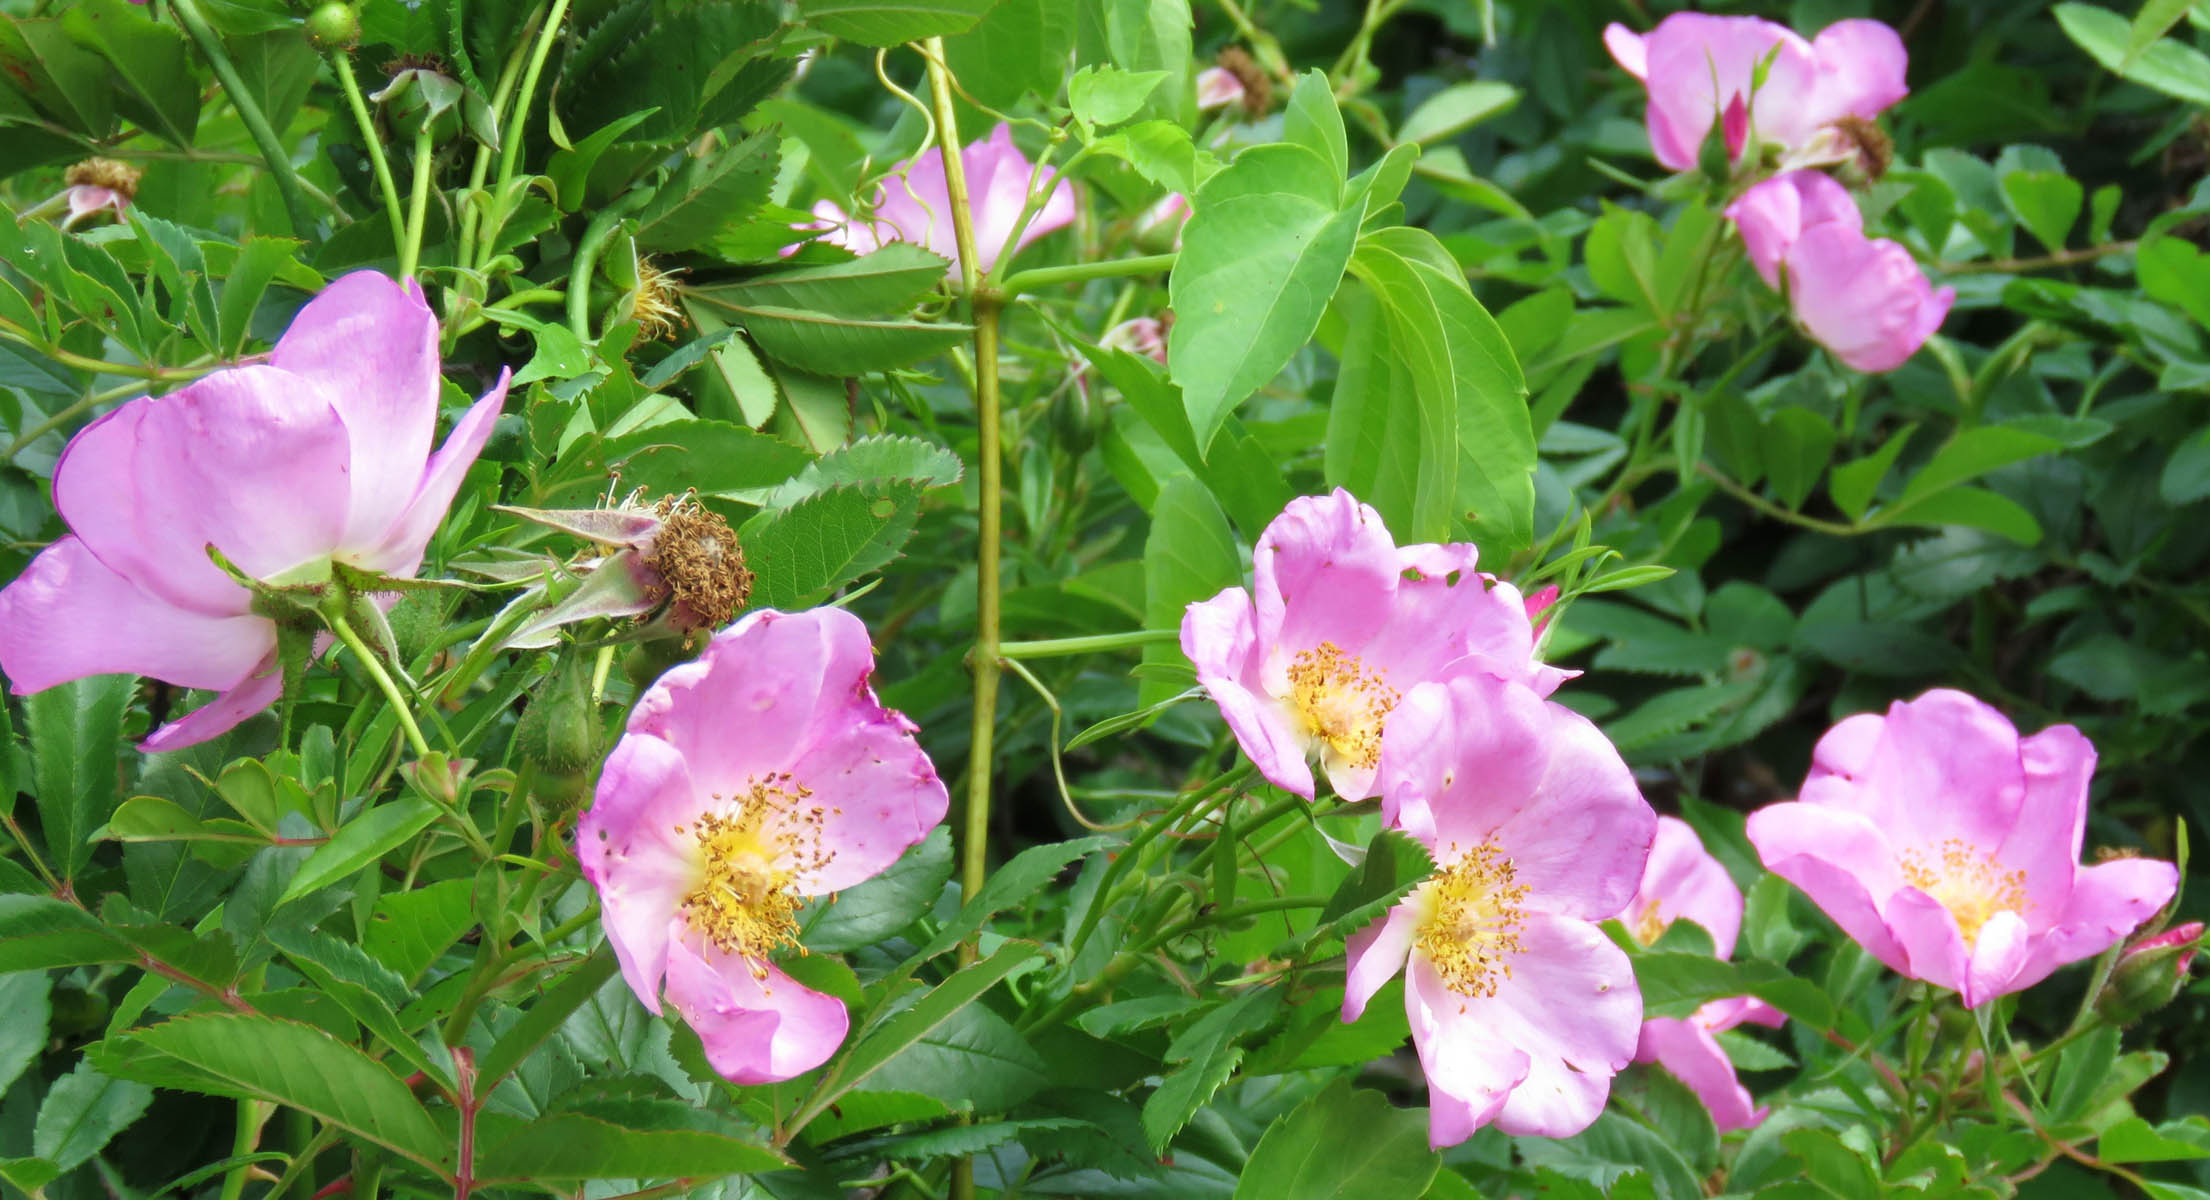 Wild roses by the Millers River